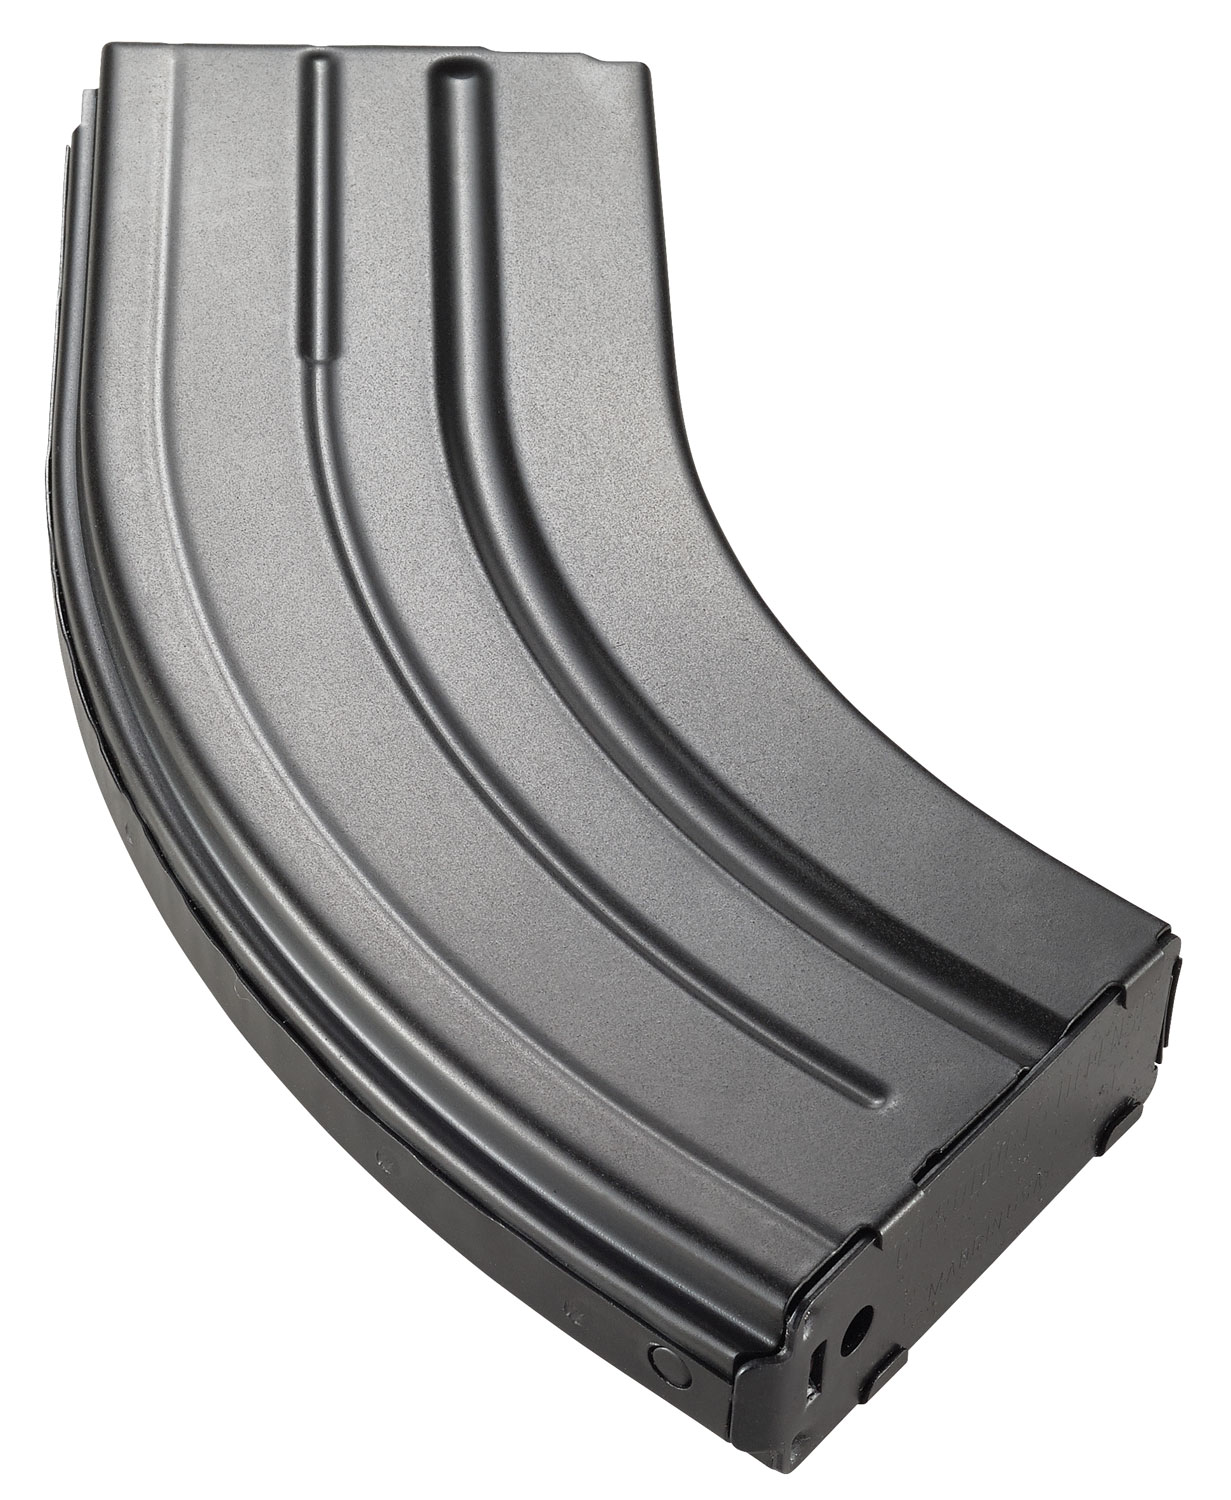 CPD MAGAZINE AR15 7.62X39 28RD BLACKENED STAINLESS STEEL